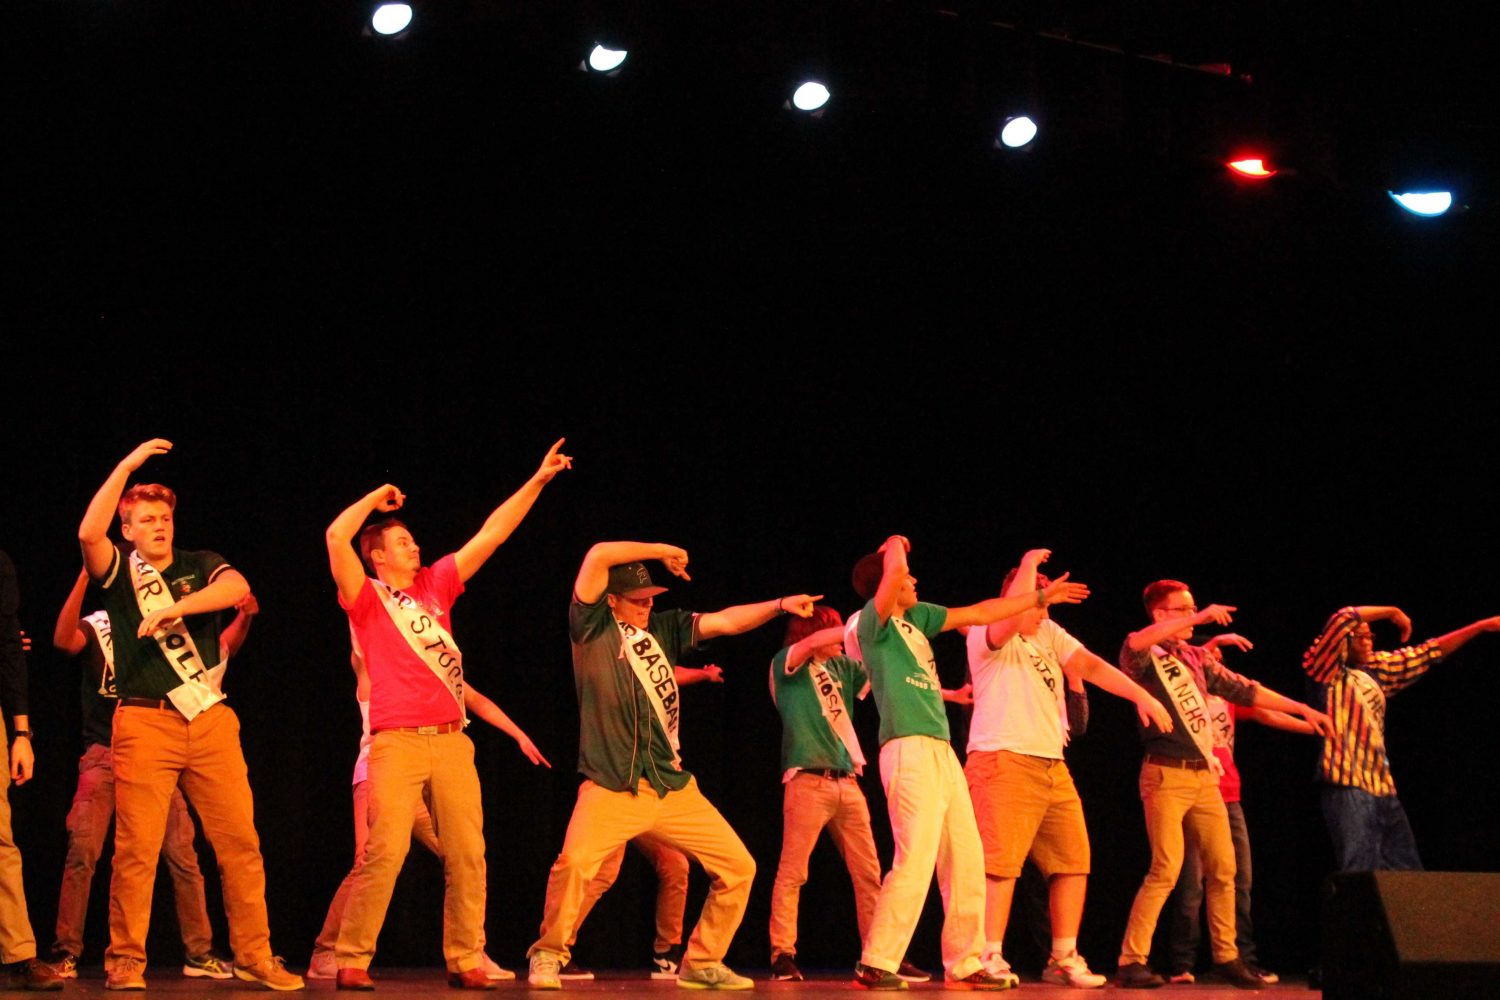 The Mr. PHS contestants perform a dance from the 2017 event. (file photo)